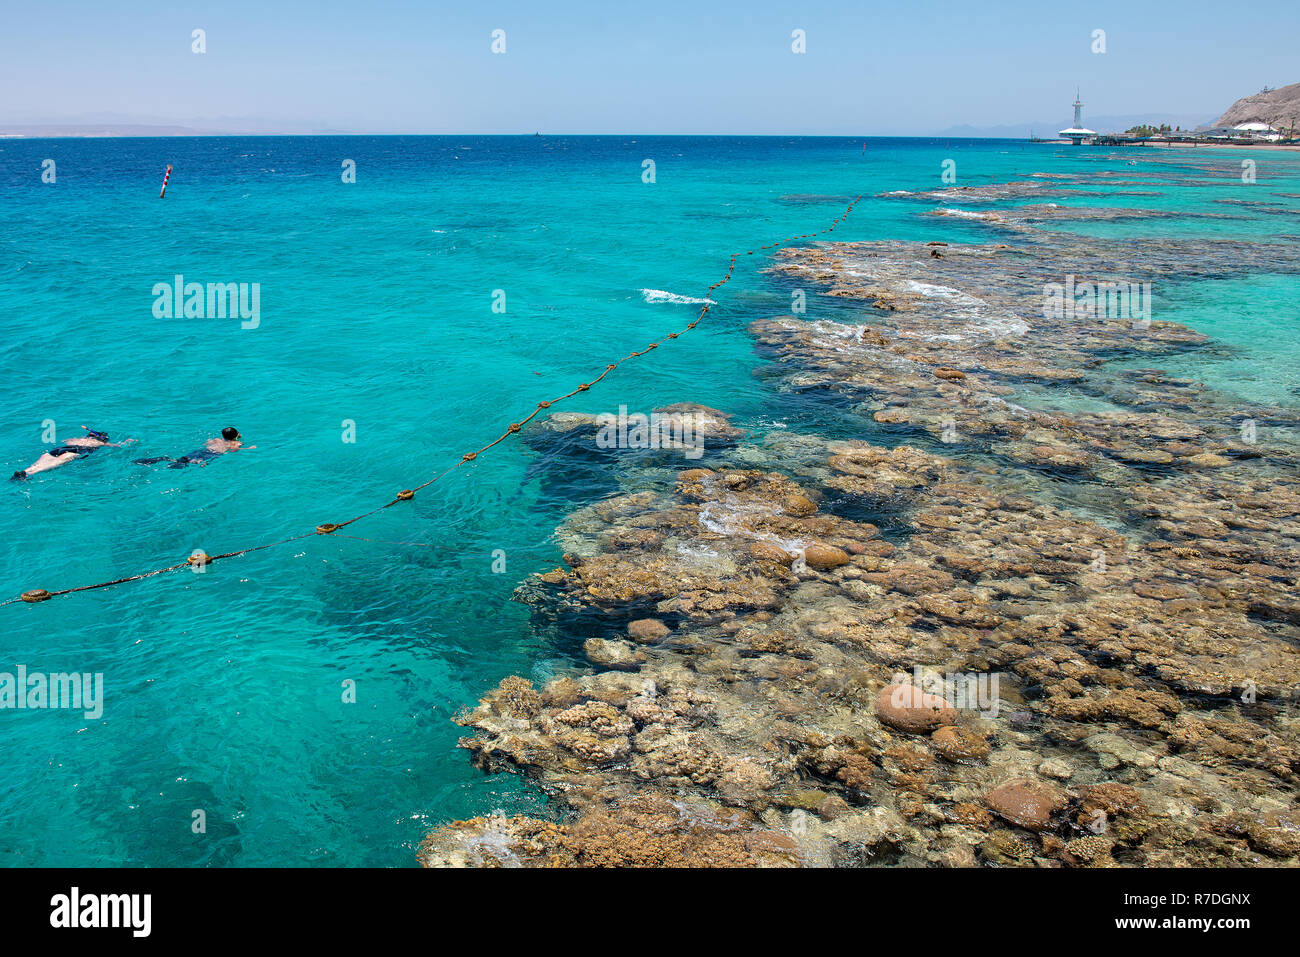 Aquamarine water and underwater corals along empty beach on popular resort of Eilat on Red Sea in Israel. Stock Photo